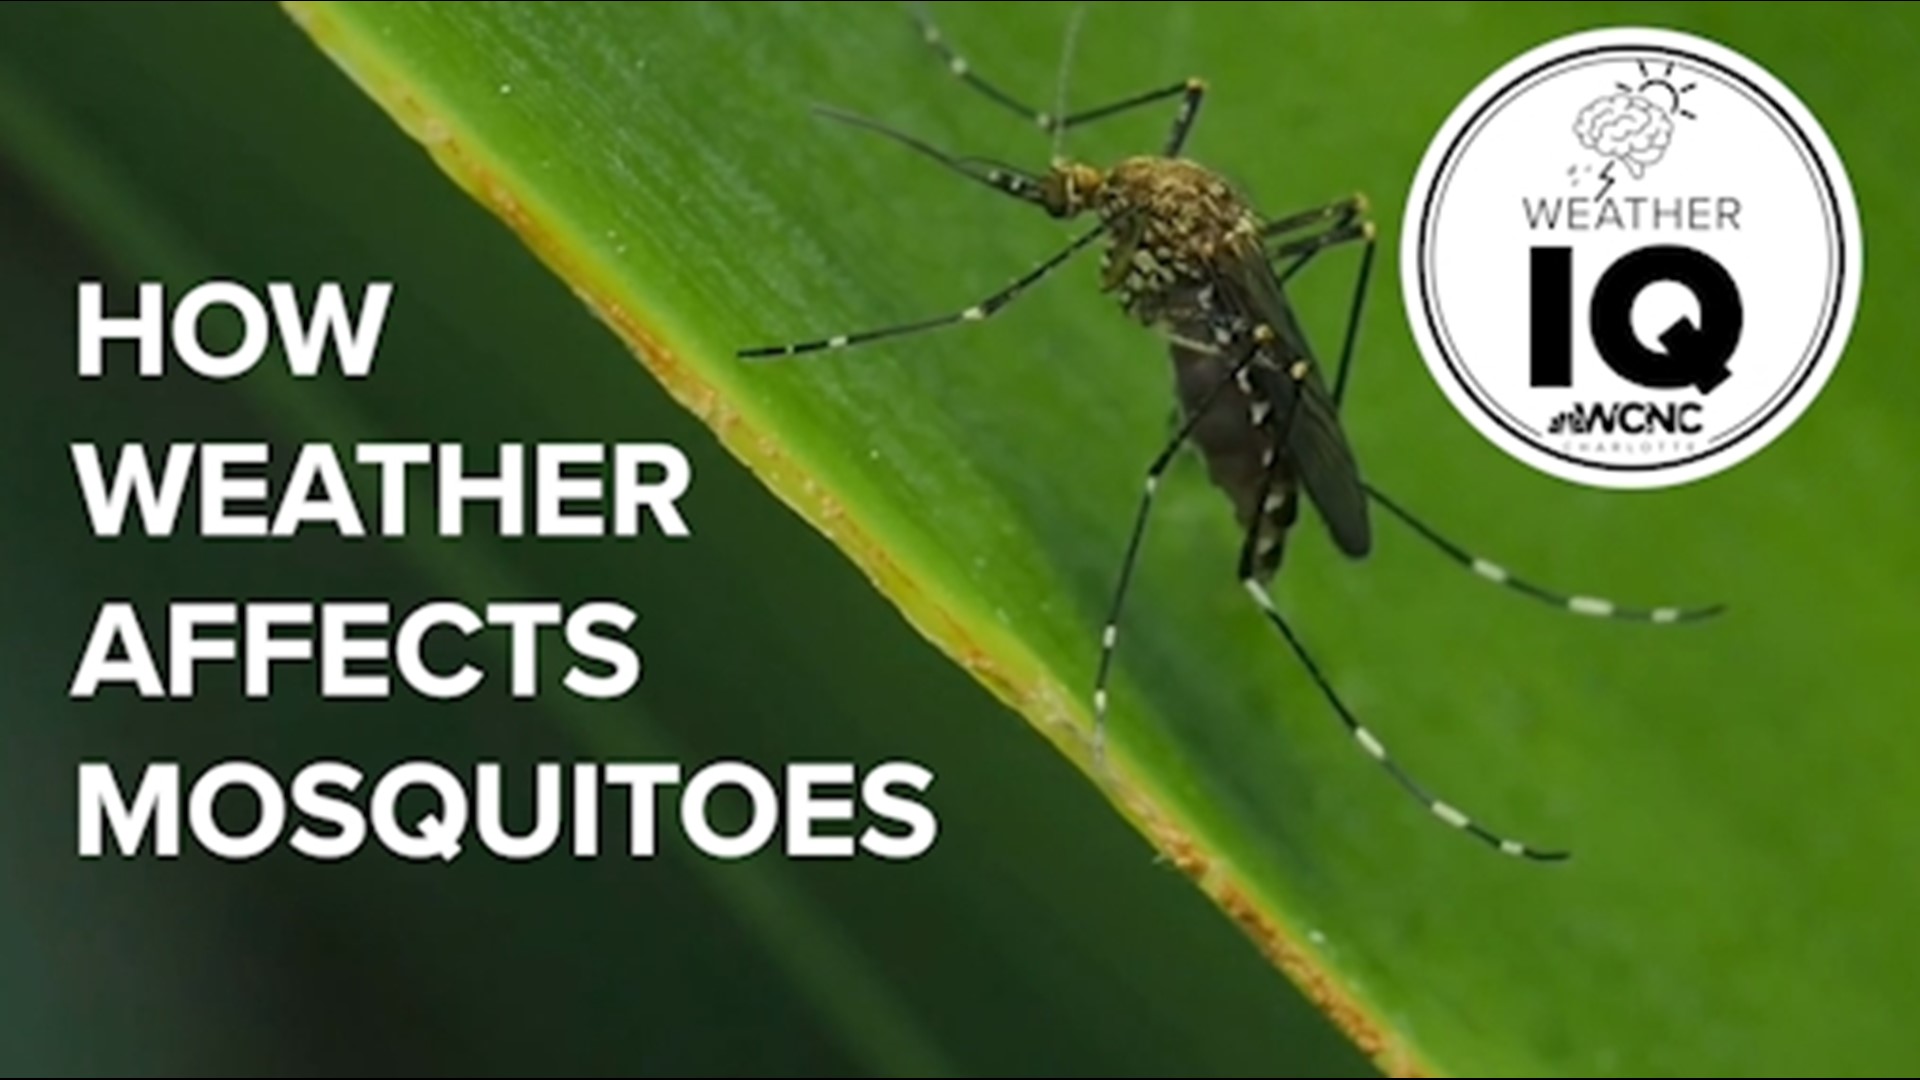 Mosquitoes like it just right when it comes to weather. Here is the ideal time of day, temperature, humidity and wind speed mosquitoes thrive in.